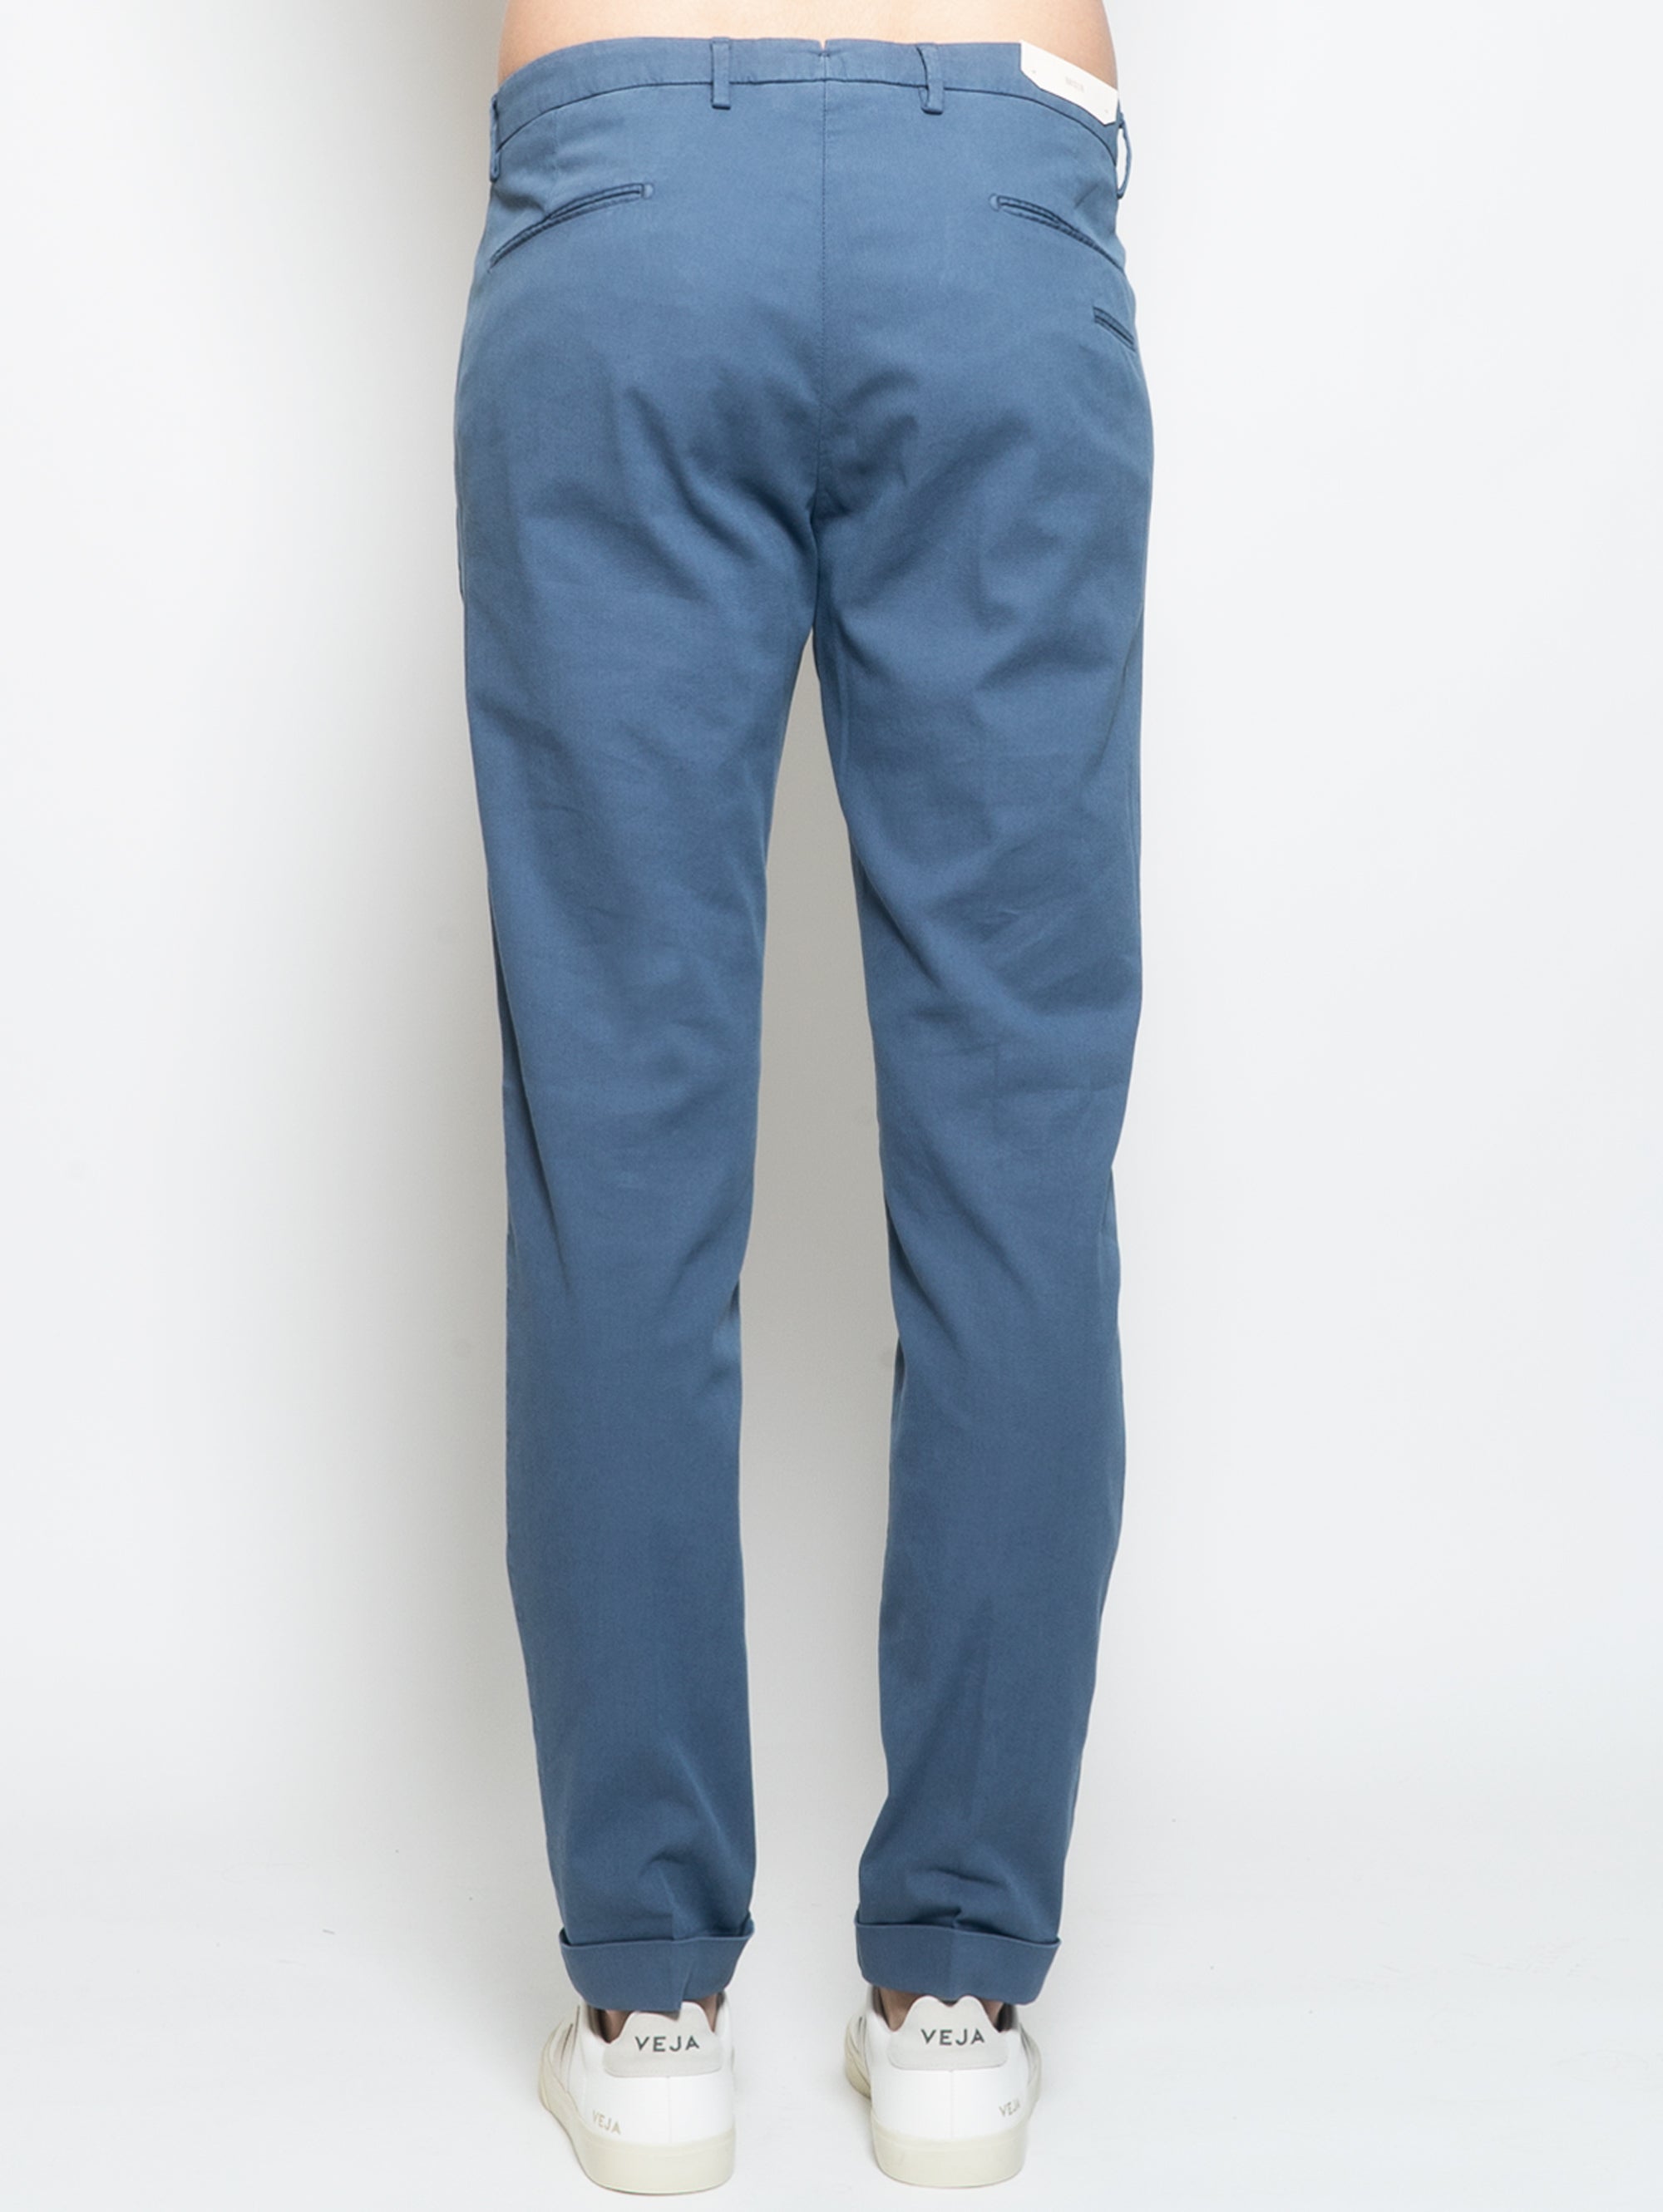 Chino Pants in Light Blue Textured